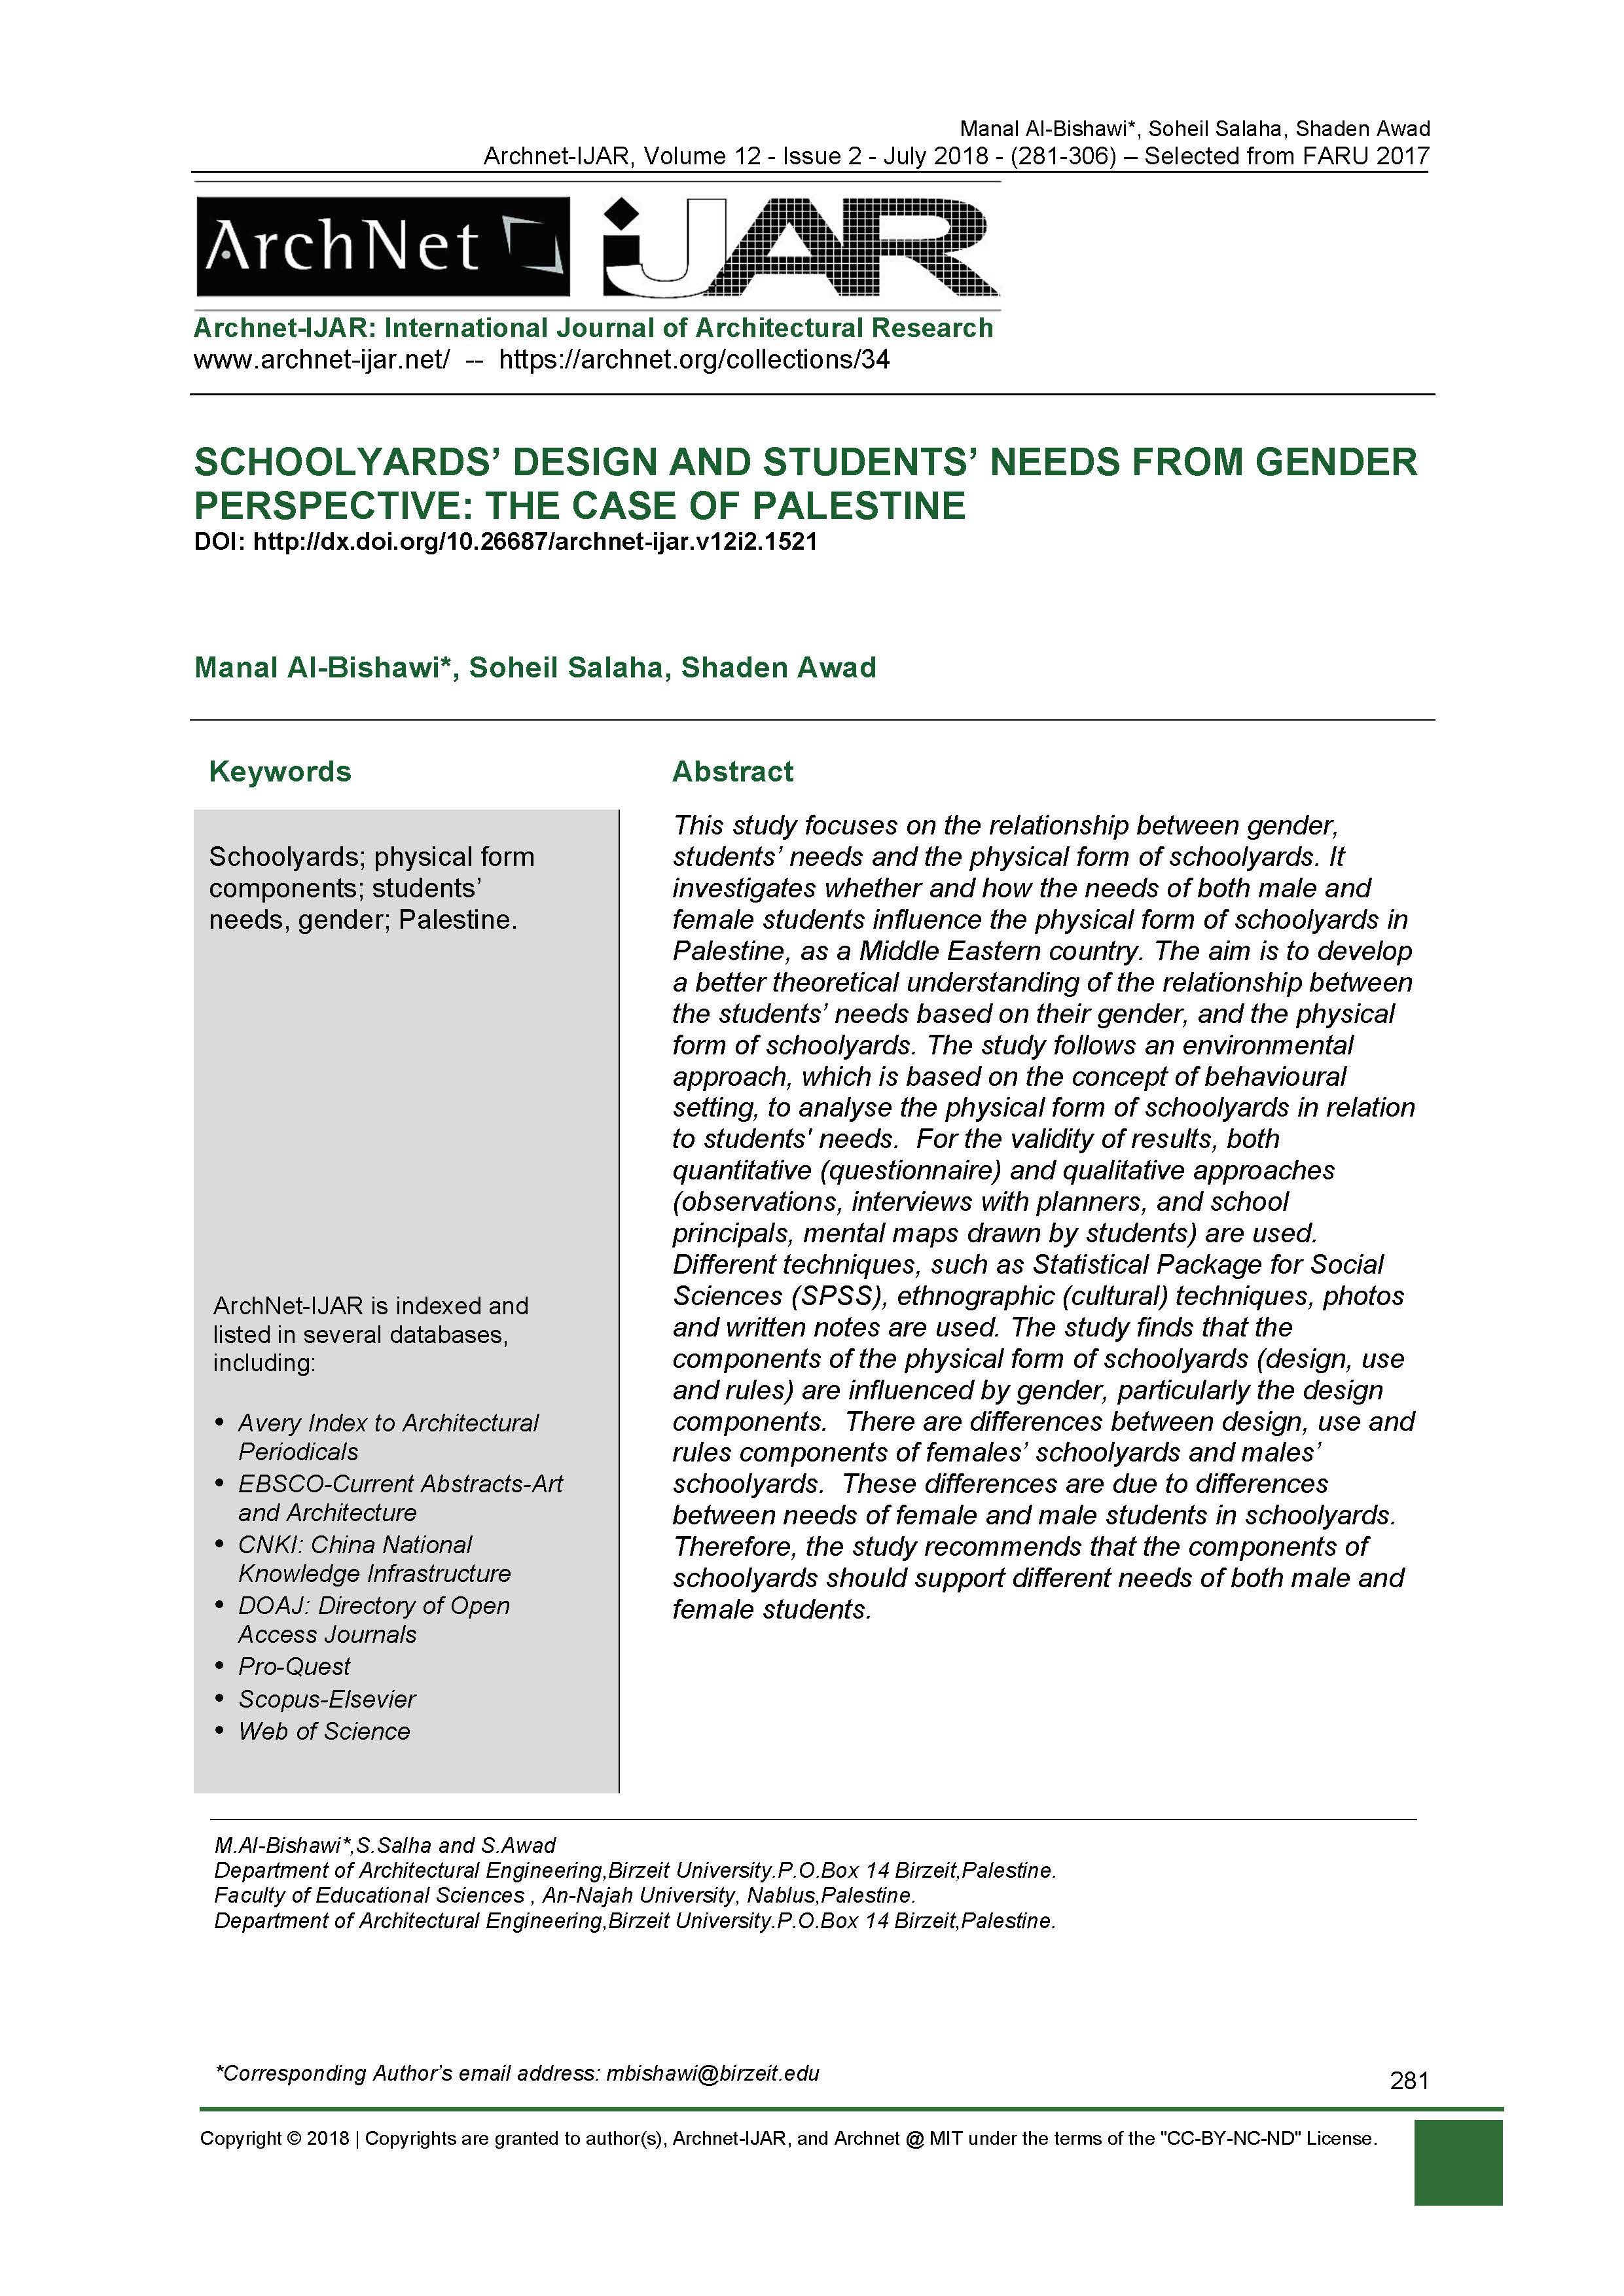 <div style="text-align: justify; ">This&nbsp;study focuses on the relationship between gender, students’ needs and the physical form of schoolyards. It investigates whether and how the needs of both male and female students influence the physical form of schoolyards in Palestine, as a Middle Eastern country. The aim is to develop a better theoretical understanding of the relationship between the students’ needs based on their gender, and the physical form of schoolyards. The study follows an environmental approach, which is based on the concept of behavioral setting, to analyse the physical form of schoolyards in relation to students' needs.&nbsp; For the validity of results, both quantitative (questionnaire) and qualitative approaches (observations, interviews with planners, and school principals, mental maps drawn by students) are used.&nbsp;&nbsp; Different techniques, such as Statistical Package for Social Sciences (SPSS), ethnographic (cultural) techniques, photos and written notes are used. The study finds that the components of the physical form of schoolyards (design, use and rules) are influenced by gender, particularly the design components. &nbsp;There are differences between design, use and rules components of females’ schoolyards and males’ schoolyards.&nbsp; These differences are due to differences between needs of female and male students in schoolyards.&nbsp; Therefore, the study recommends that the components of schoolyards should support different needs of both male and female students.</div>